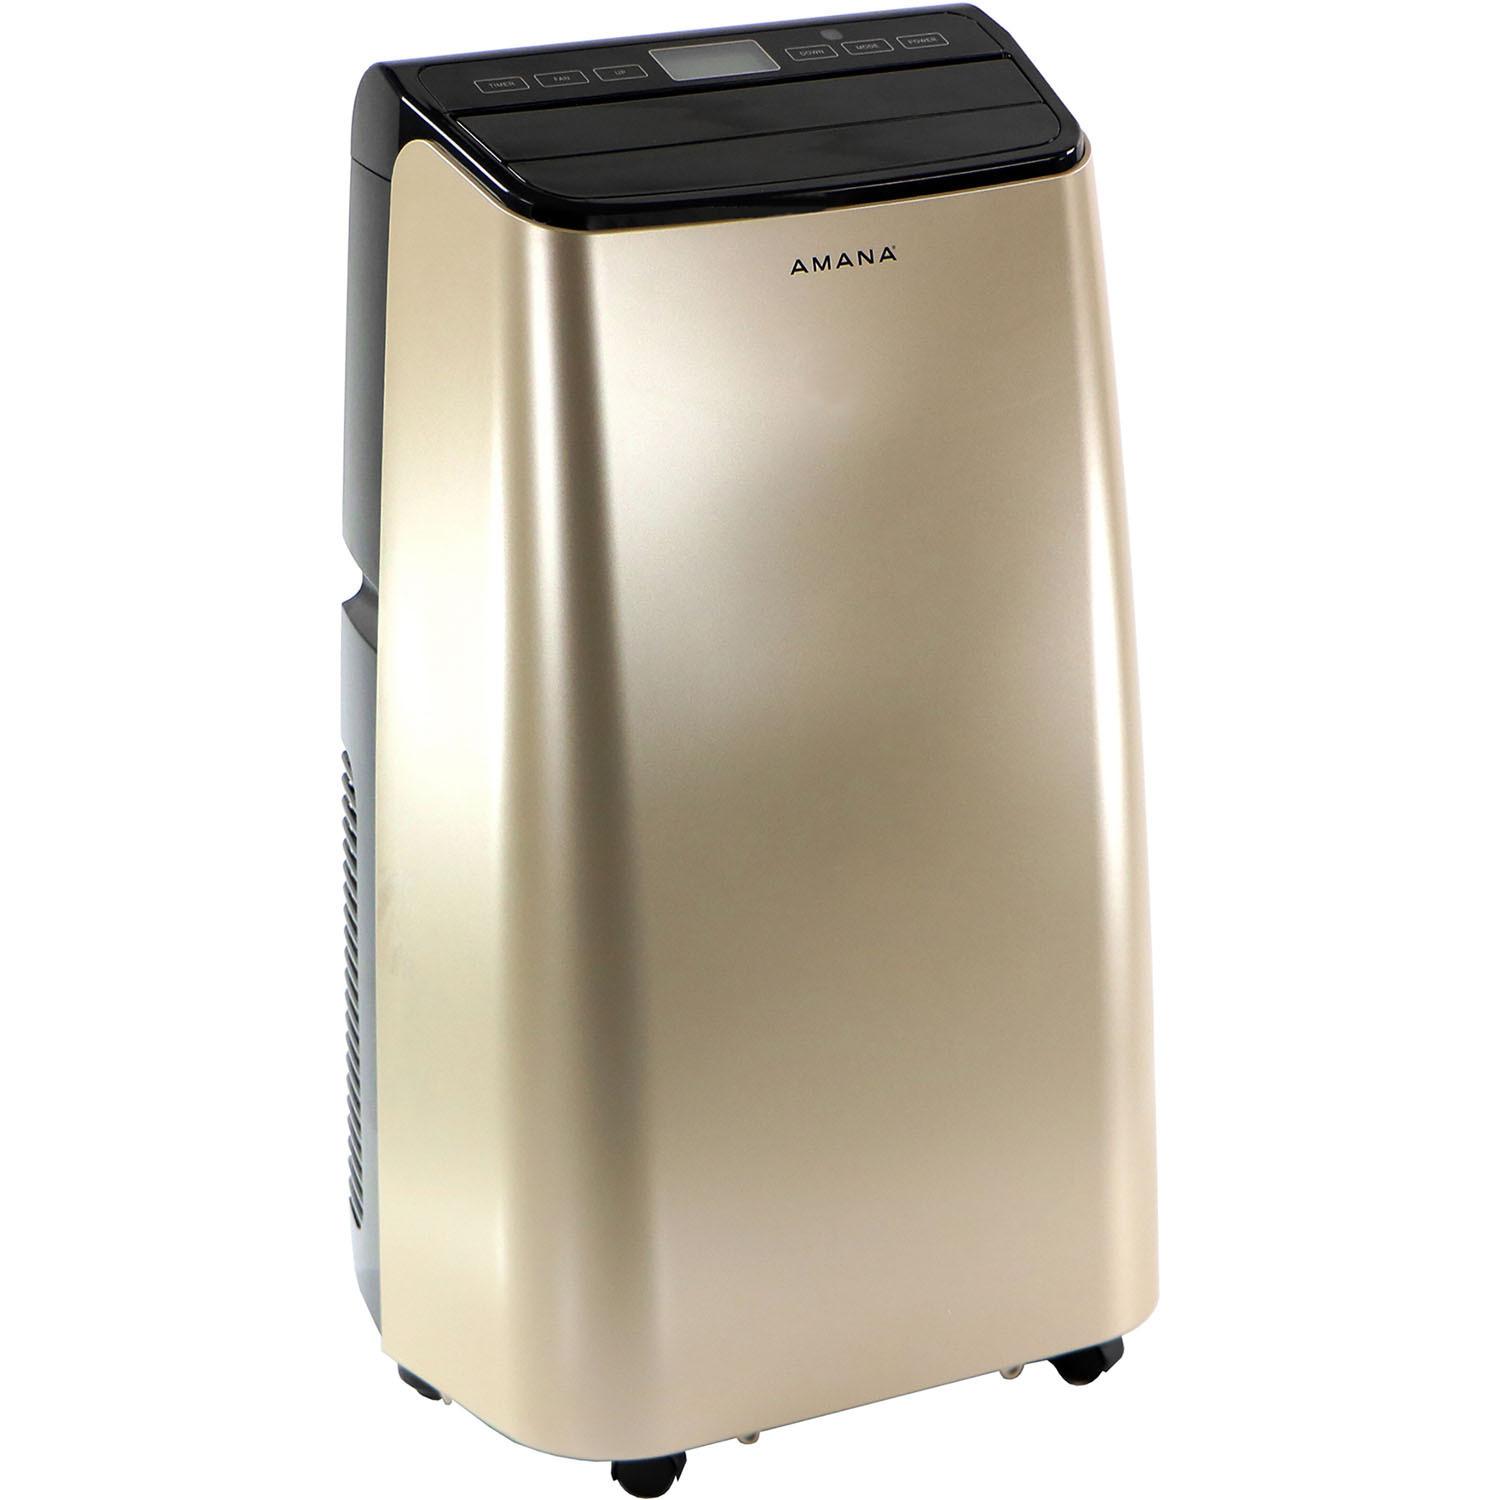 AMANA AMAP101AD2 Portable Air Conditioner with Remote Control in Gold/Black for Rooms up to 450-Sq. Ft.